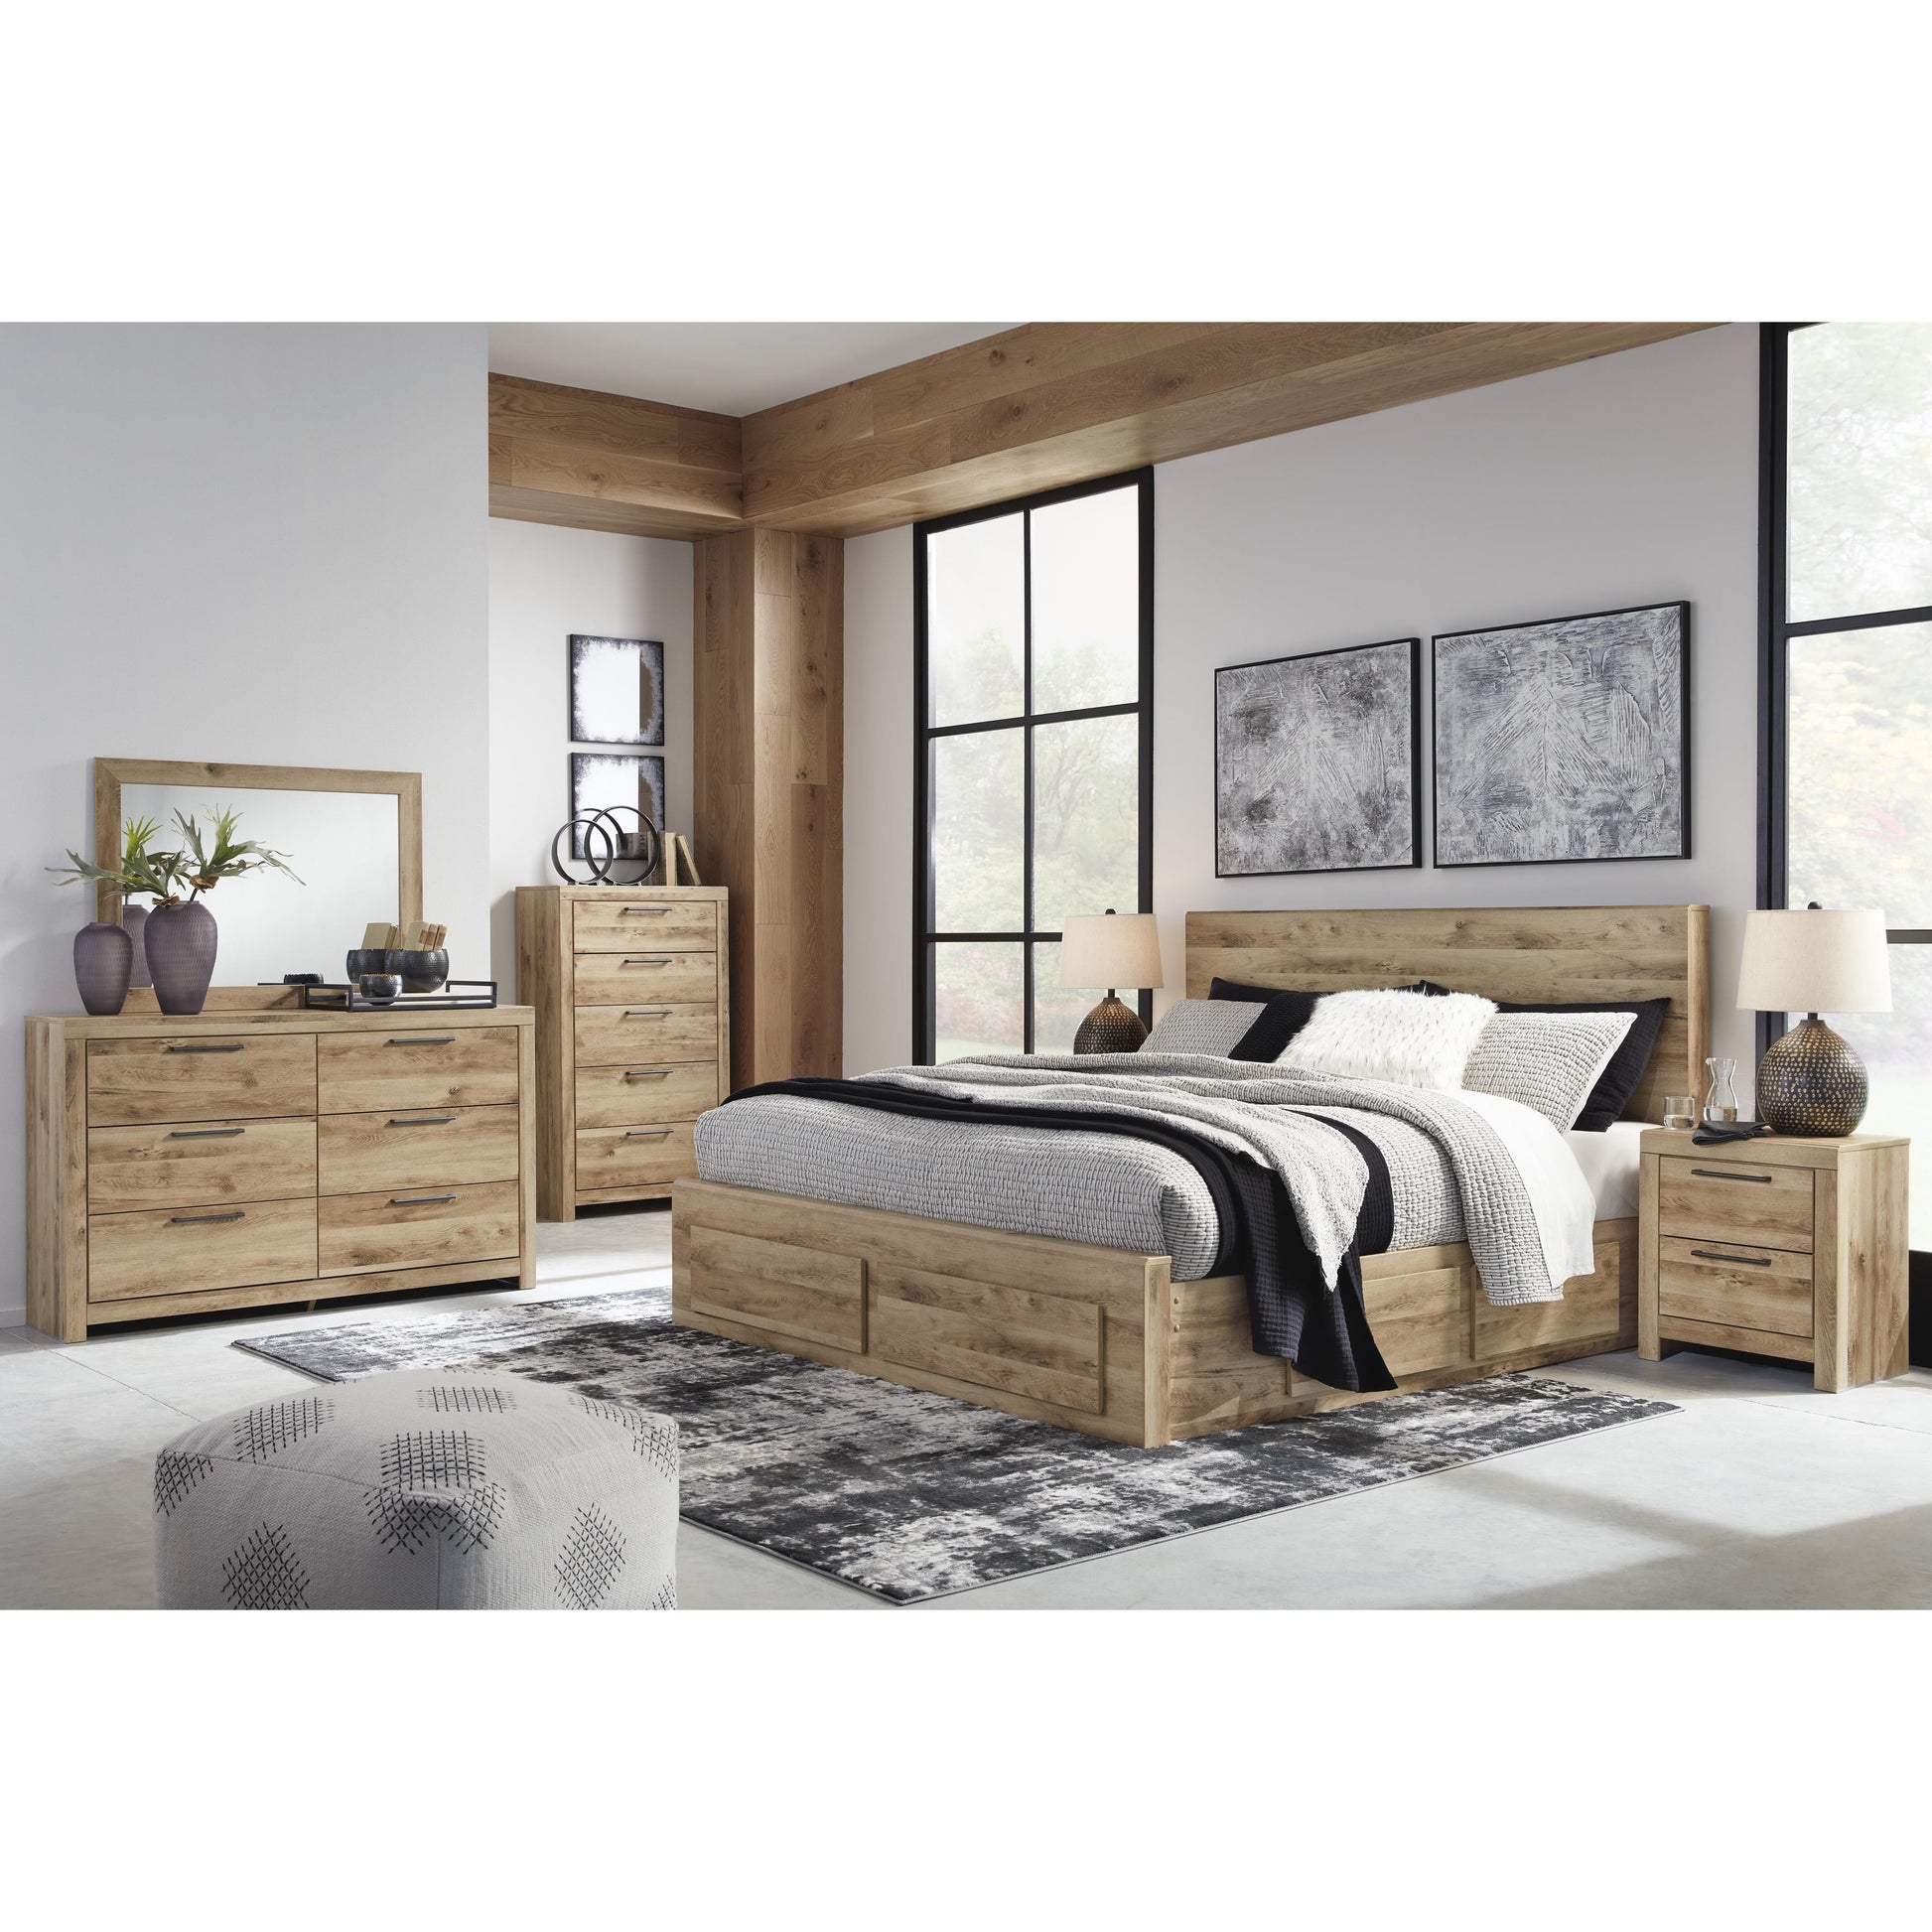 Signature Design by Ashley Hyanna Queen Panel Bed with Storage B1050-57/B1050-54S/B1050-60/B1050-60/B100-13 IMAGE 6